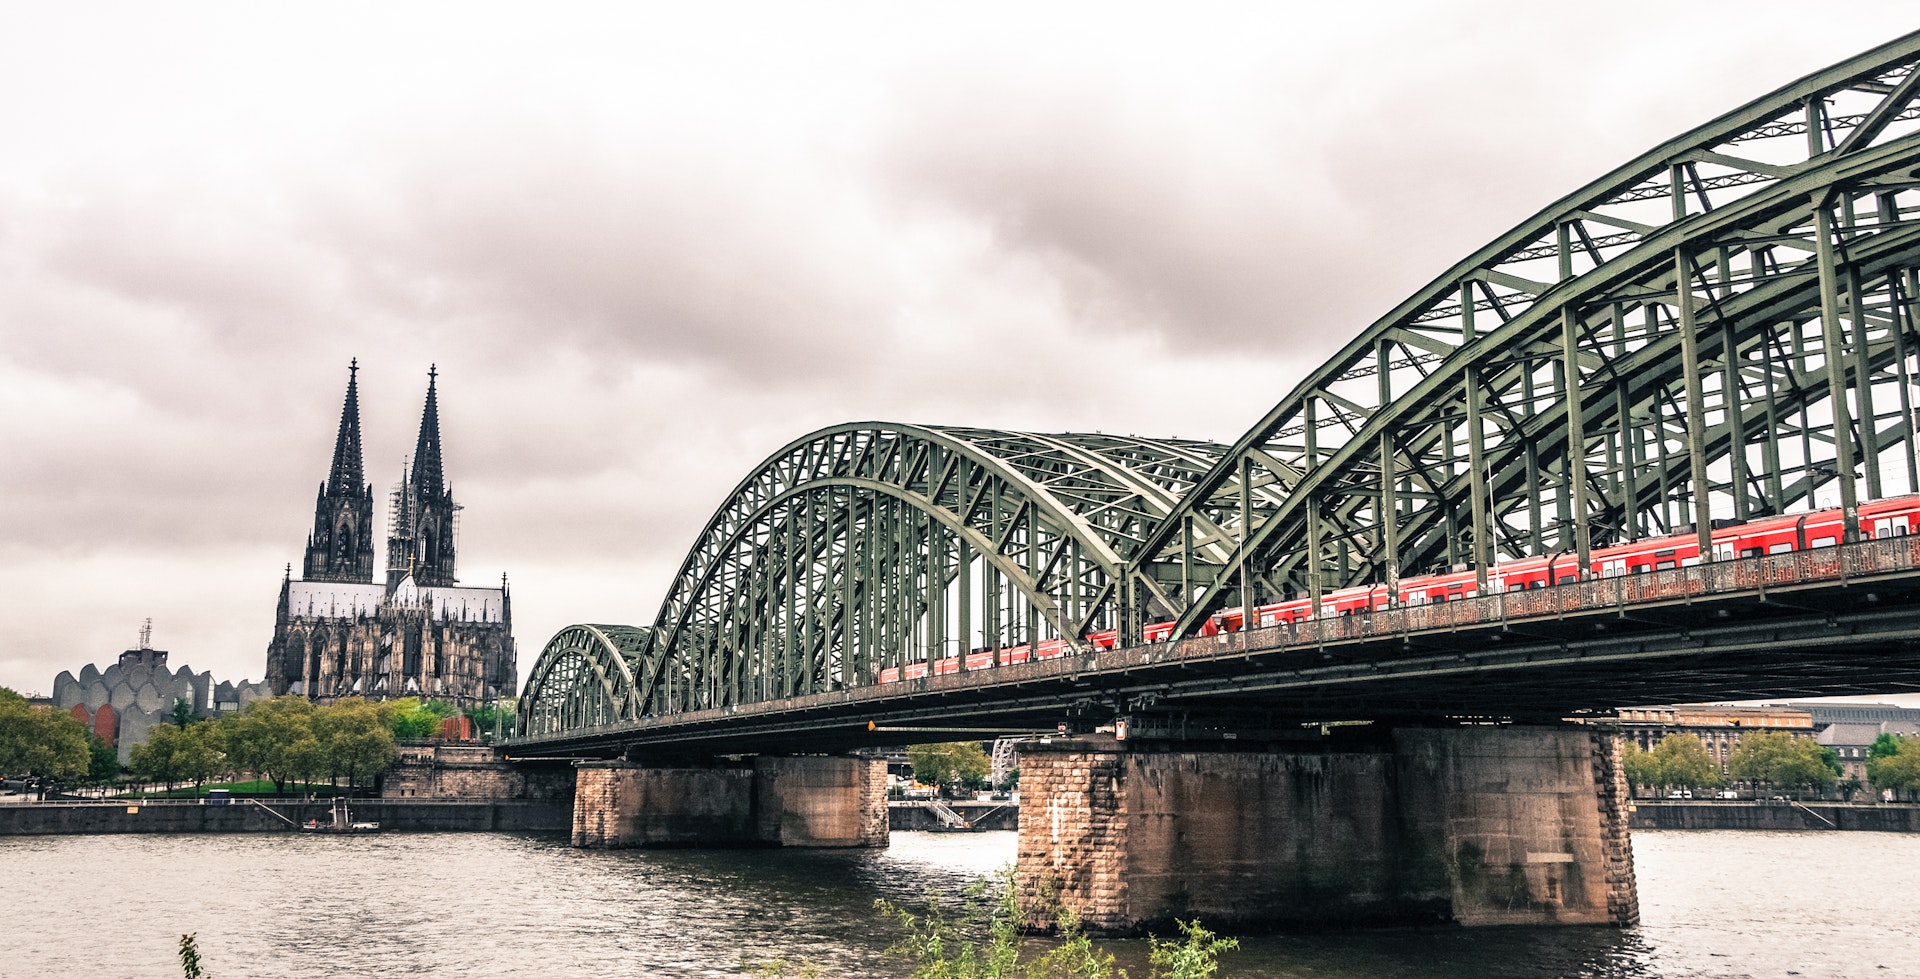 The train into Cologne on the Hohenzollern Bridge, passing over the Rhine River